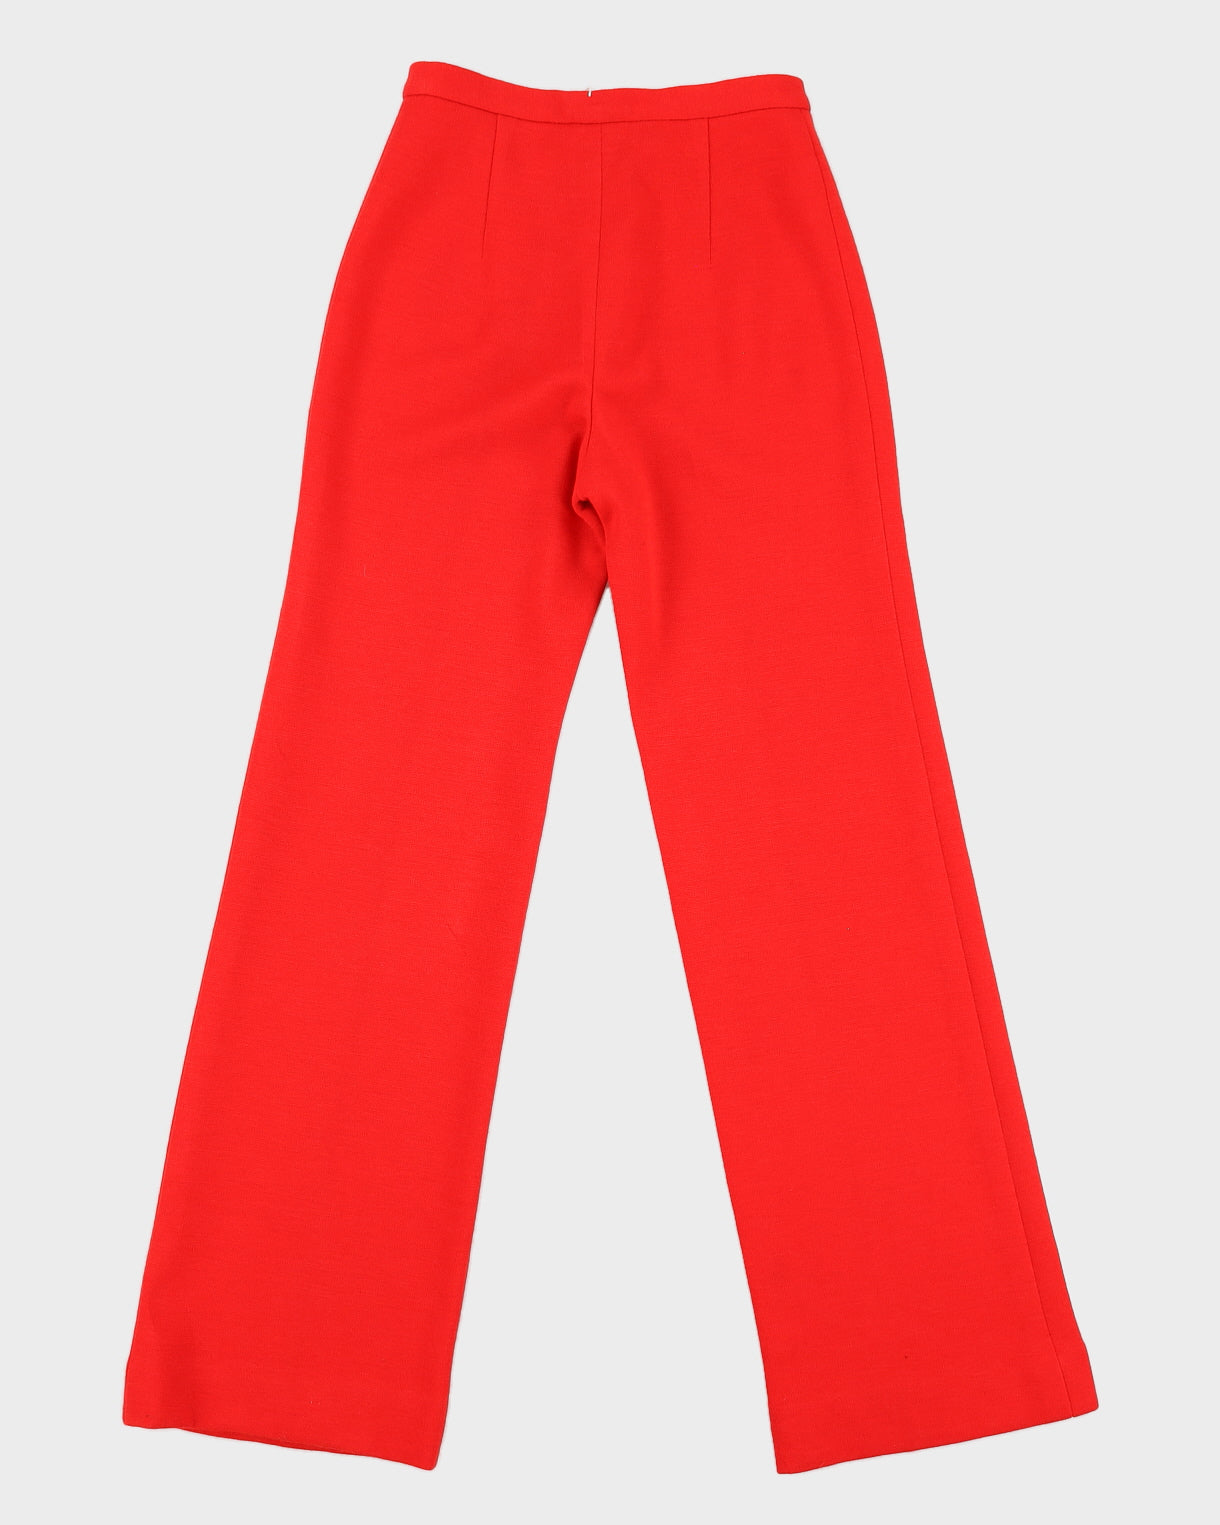 Deadstock 1970s Red Trousers - XS